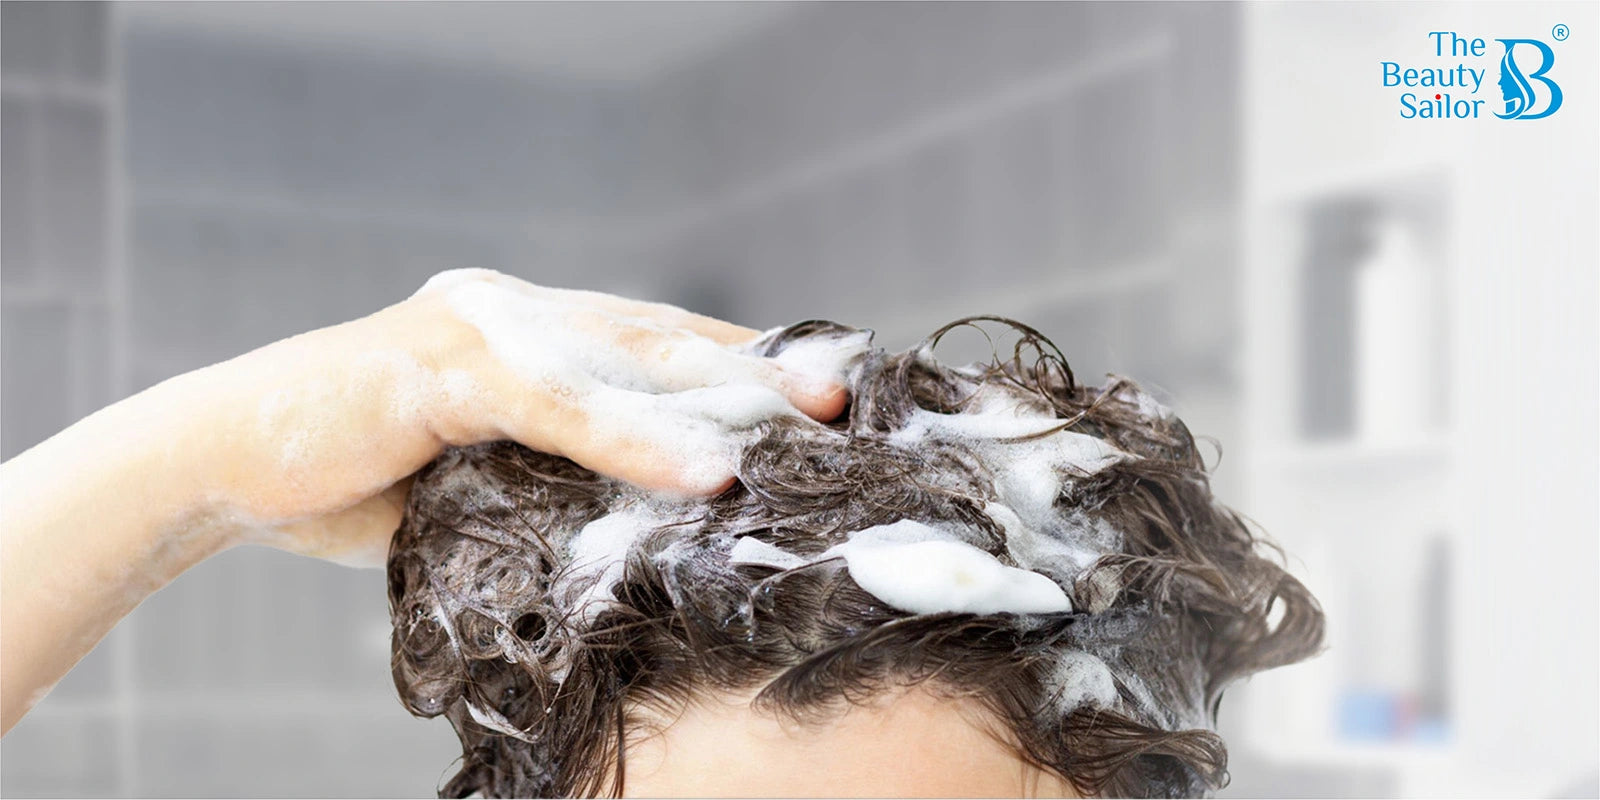 Common Hair Washing Mistakes You Should Avoid